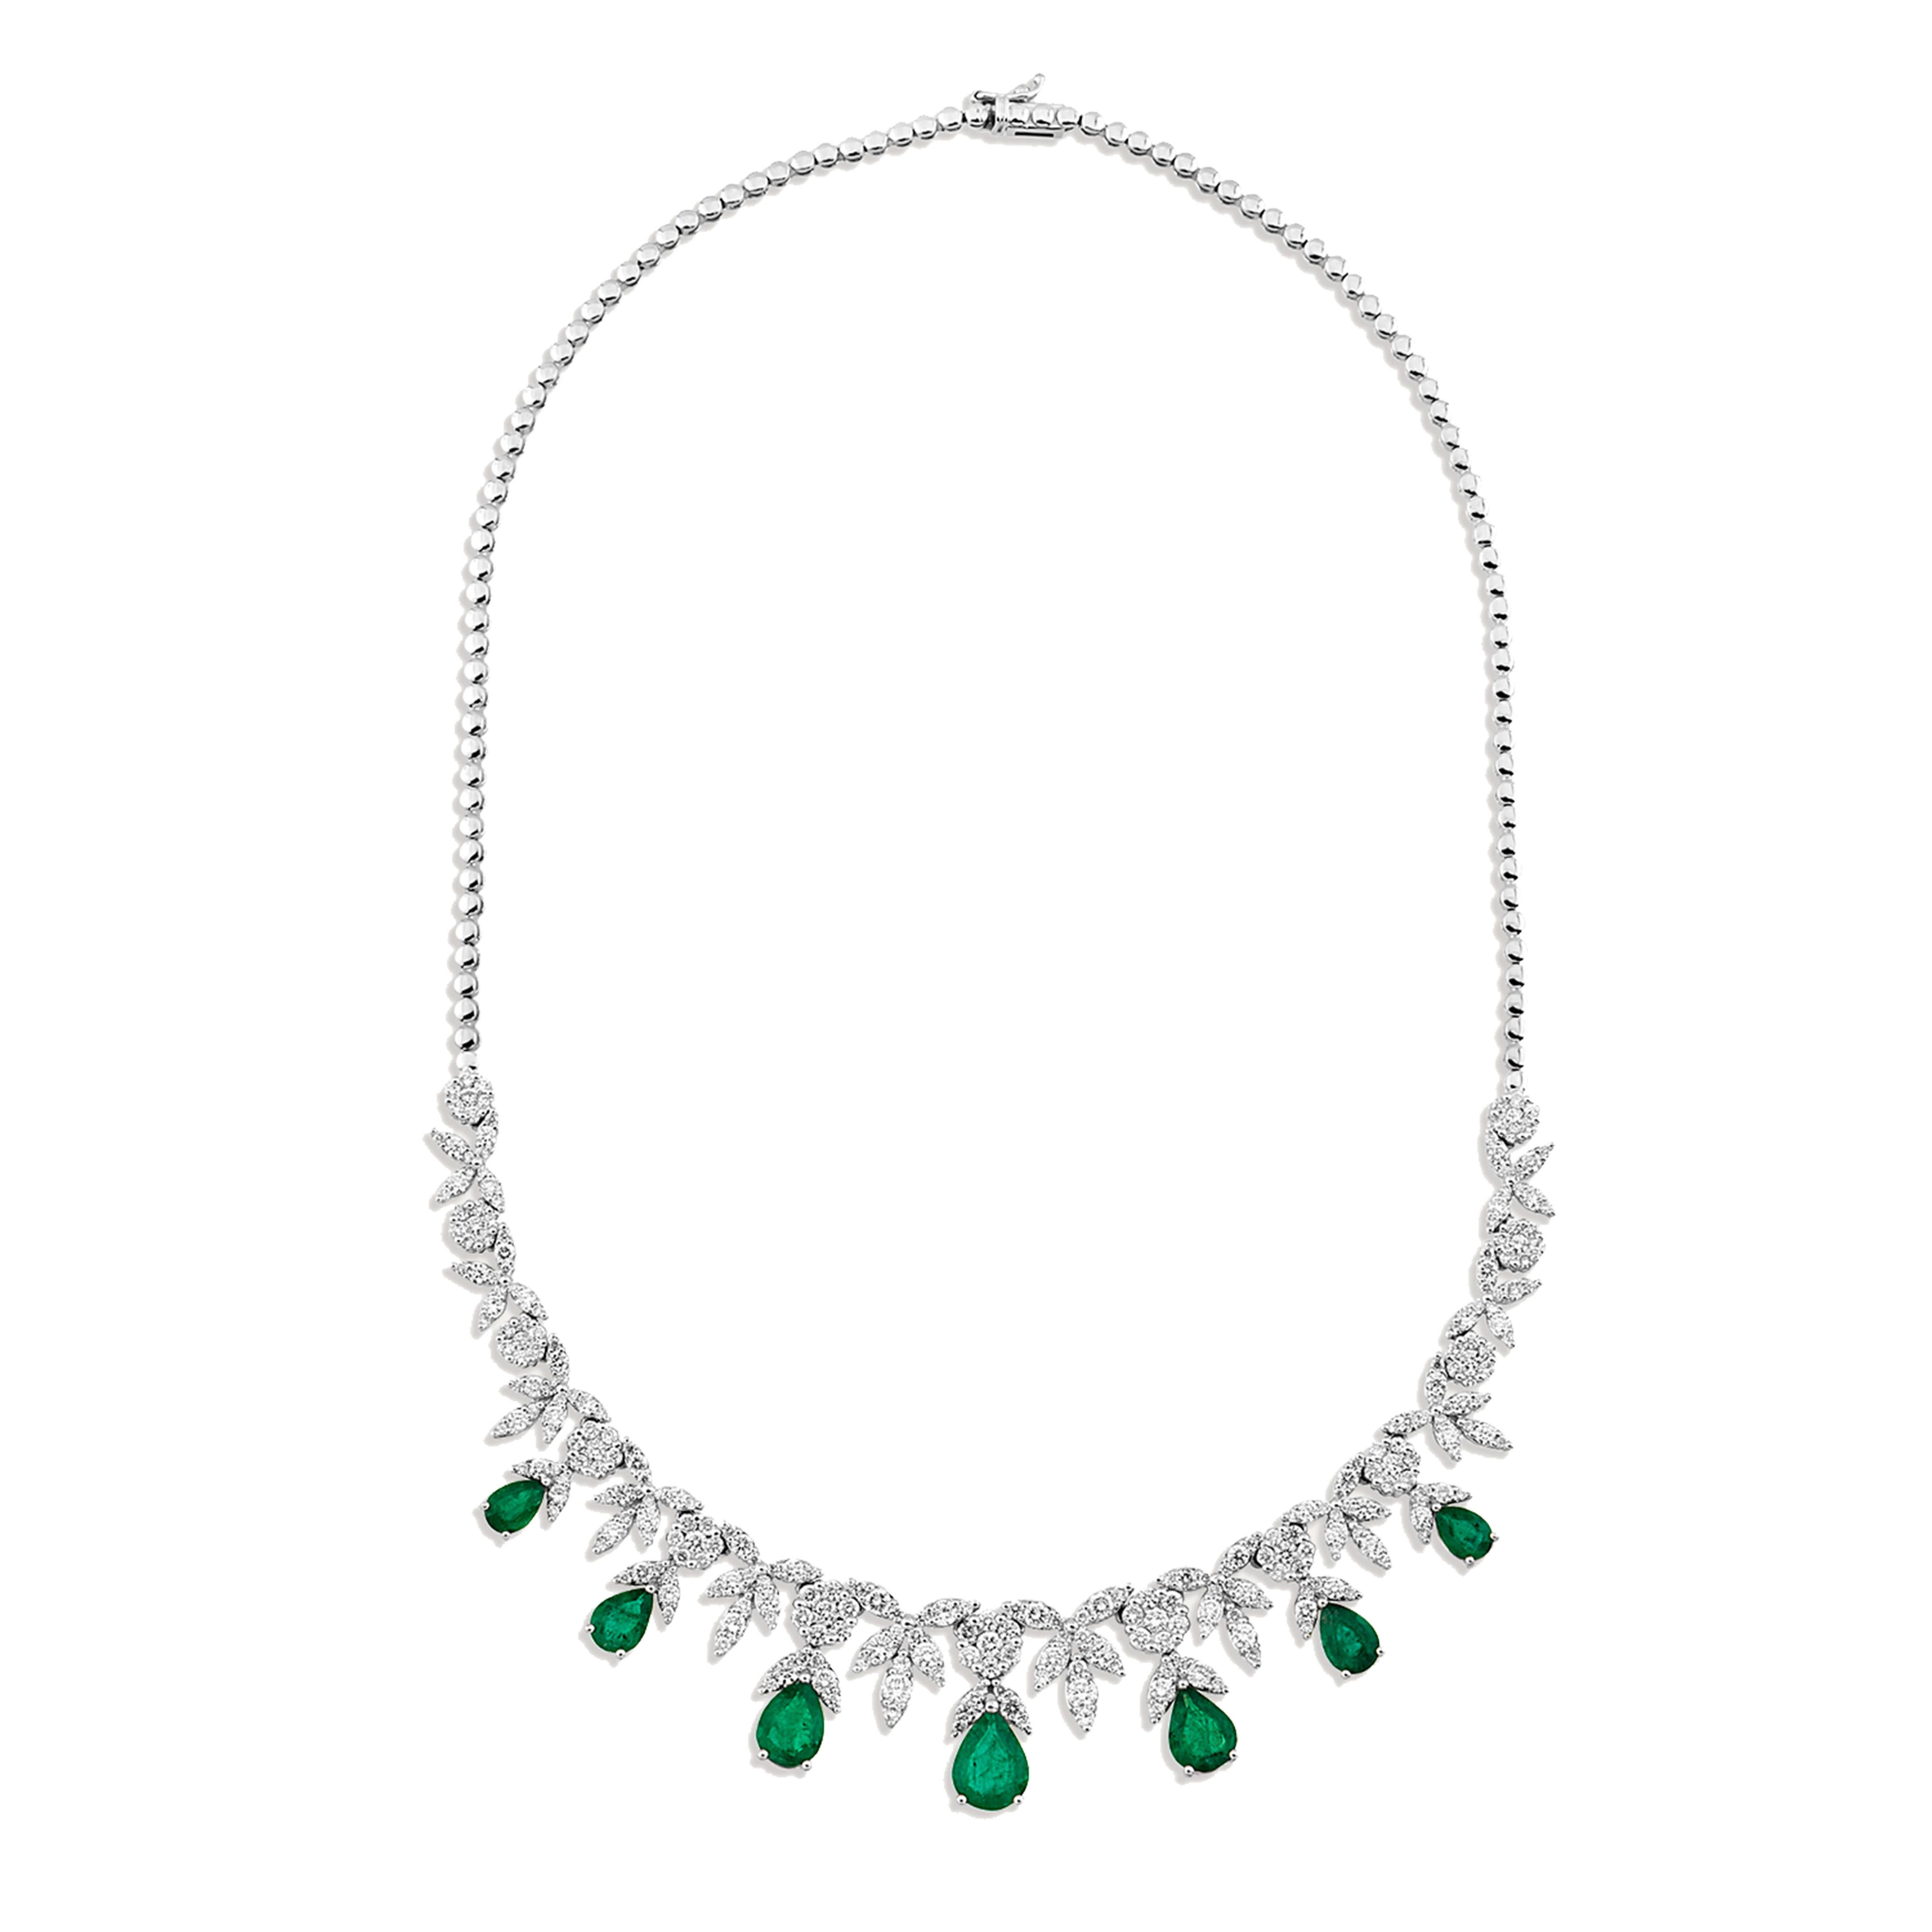 Art Deco Emerald and Diamond 9.95 Carat Necklace in 18K White Gold For Sale